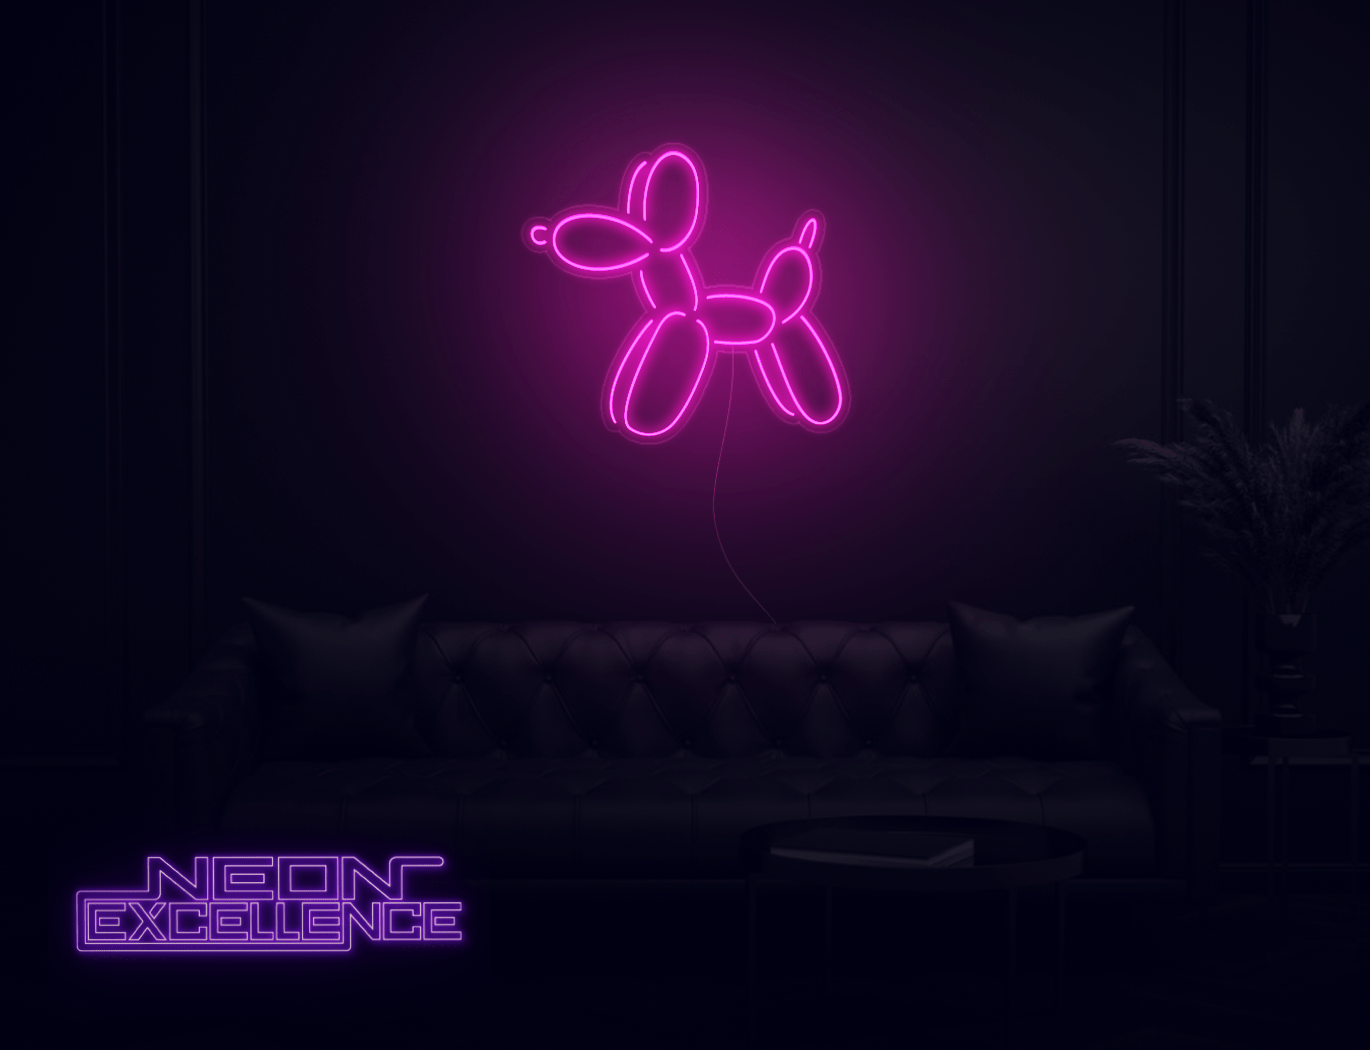 Balloon Dog LED Neon Sign - Neon Excellence